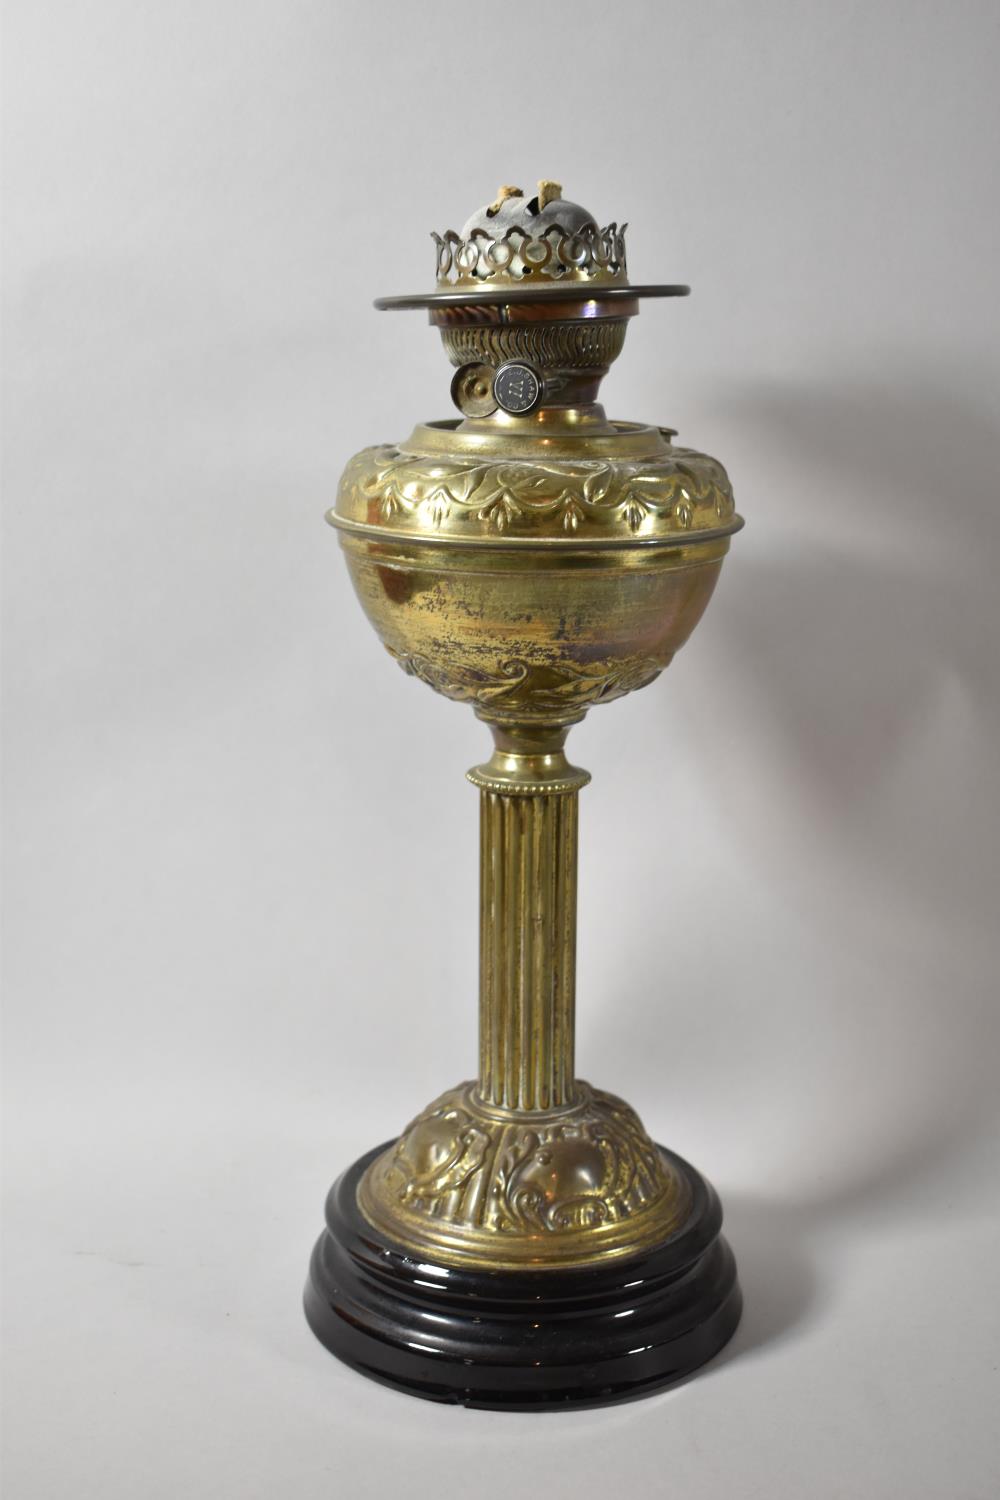 A Late 19th/Early 20th Century Pressed Brass Oil Lamp with Ribbed Column Support and Circular